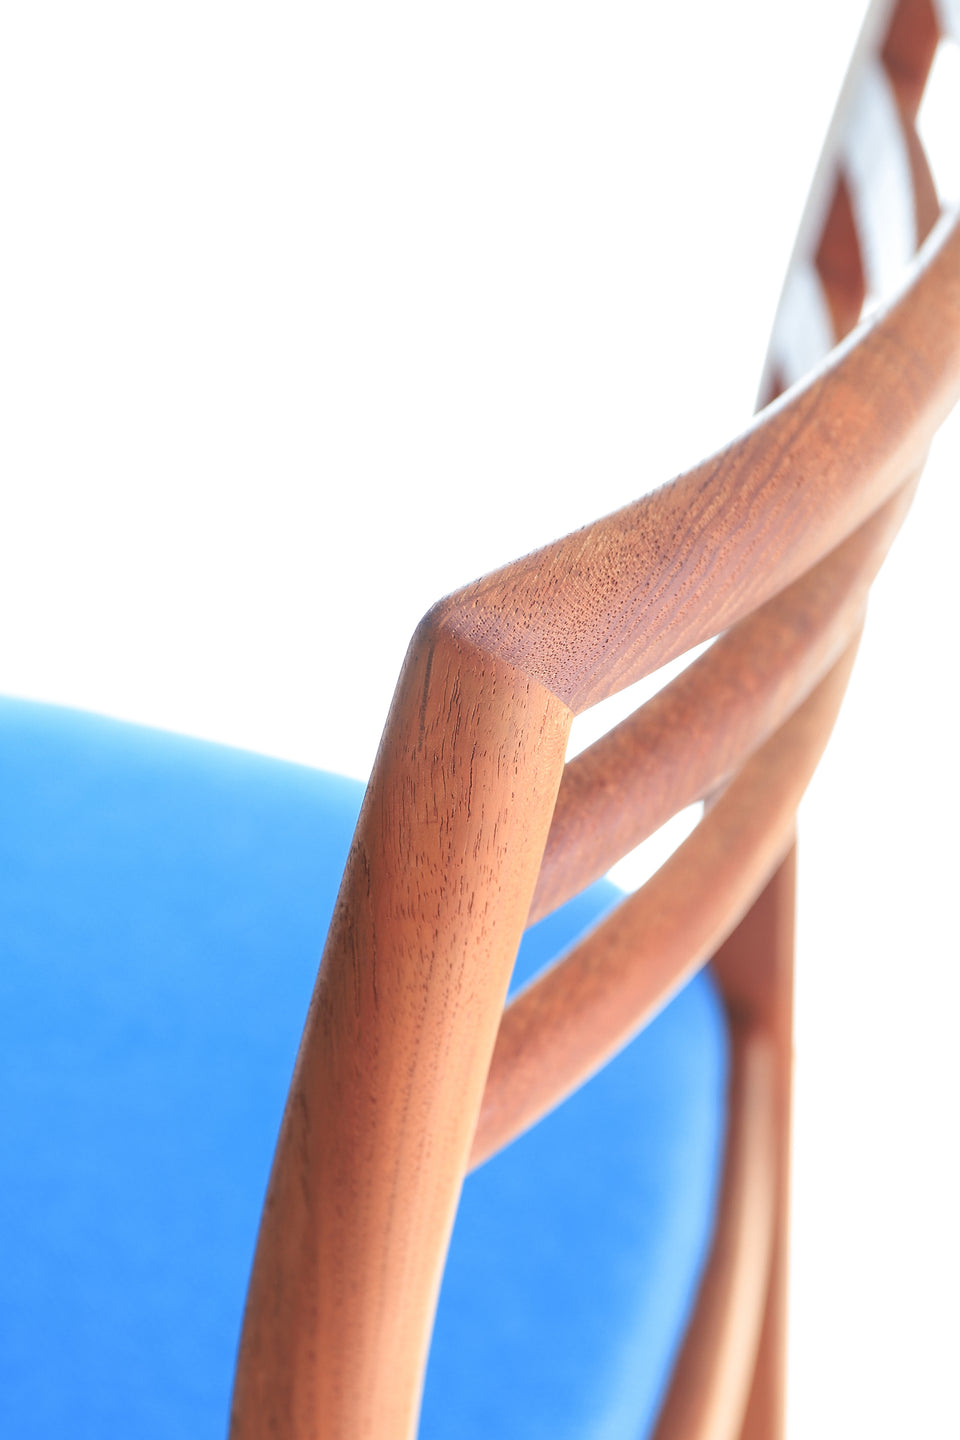 Danish Vintage Dining Chair Teakwood/デンマークヴィンテージ ダイニングチェア 椅子 チーク材 北欧家具